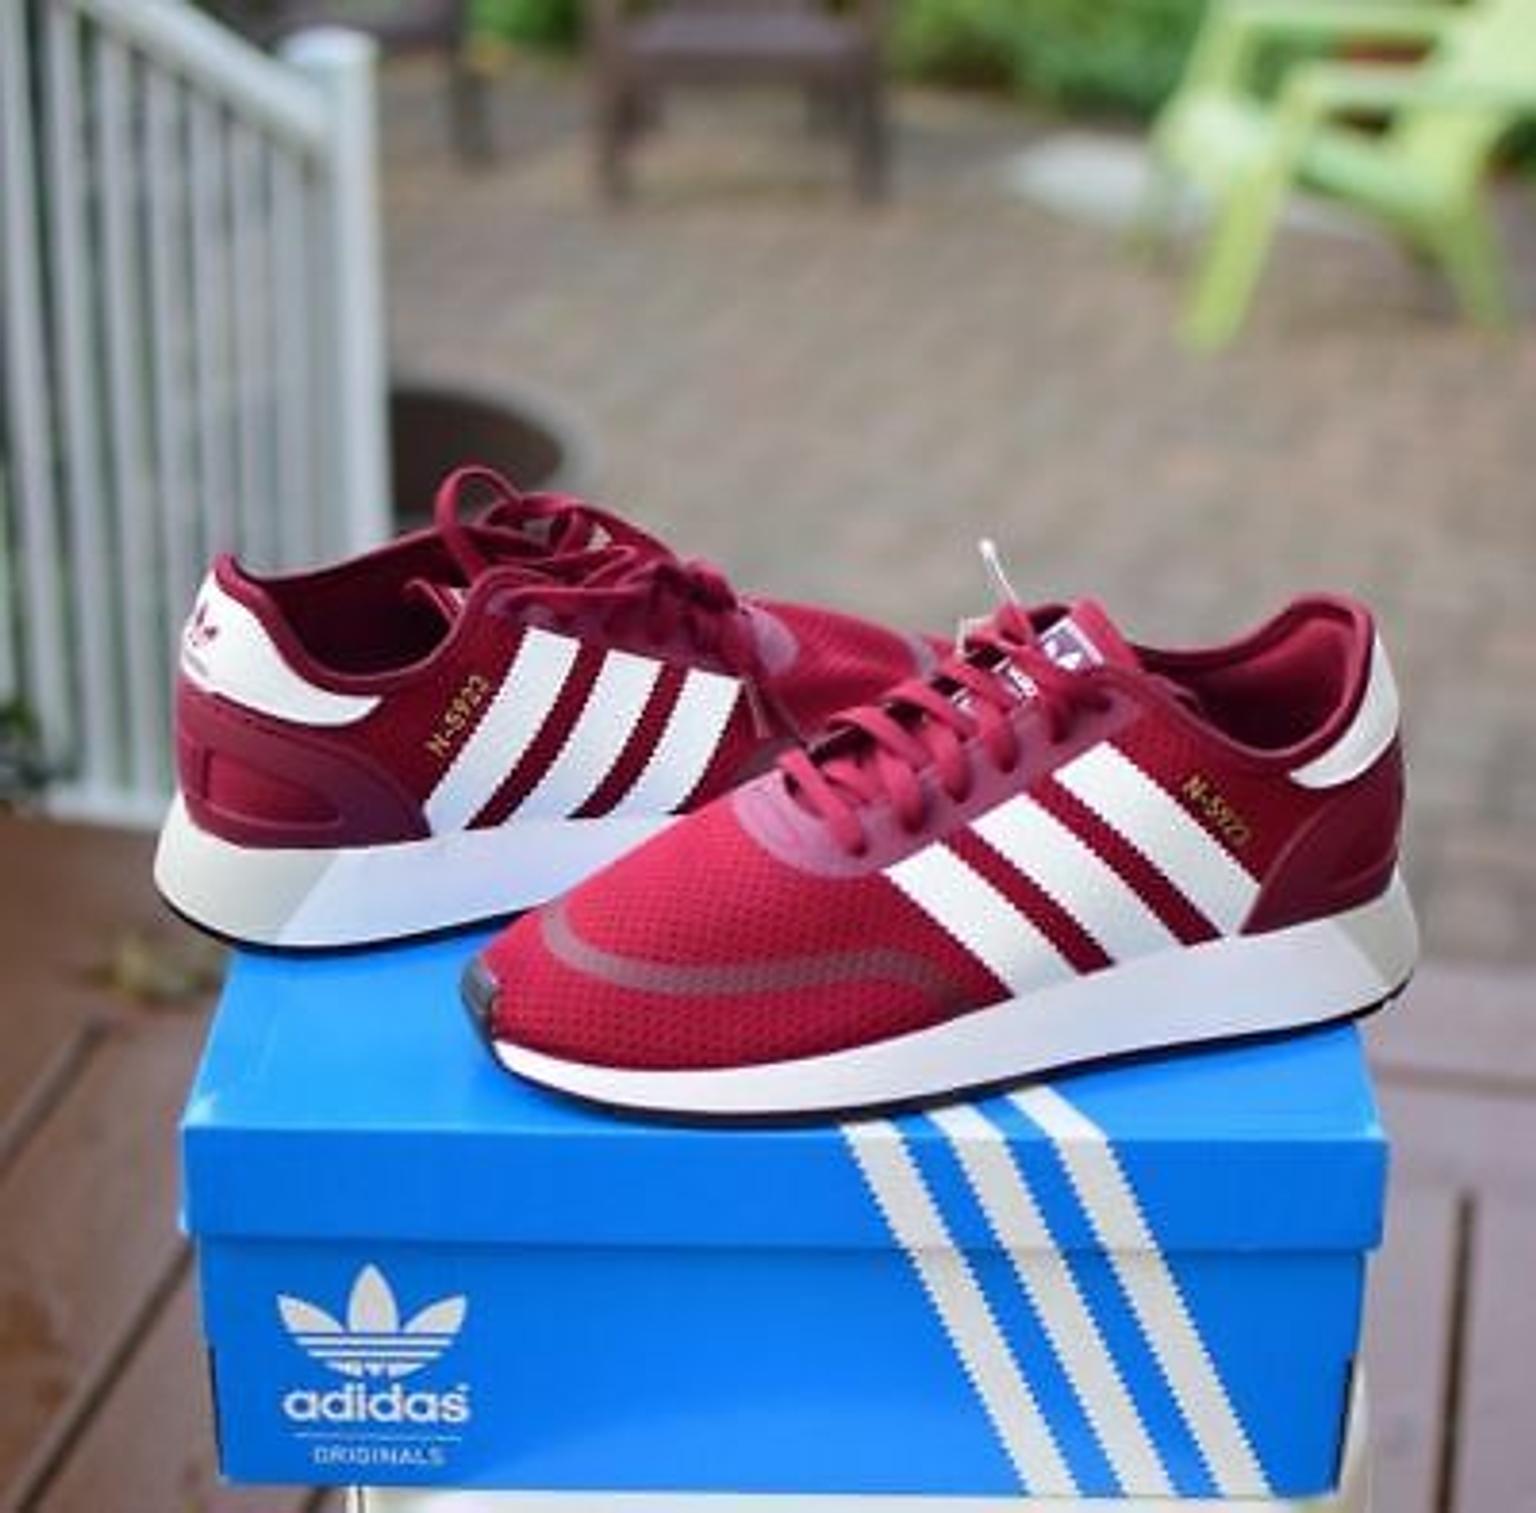 Adidas Originals N-9523 in 1210 KG Donaufeld for €60.00 for sale | Shpock